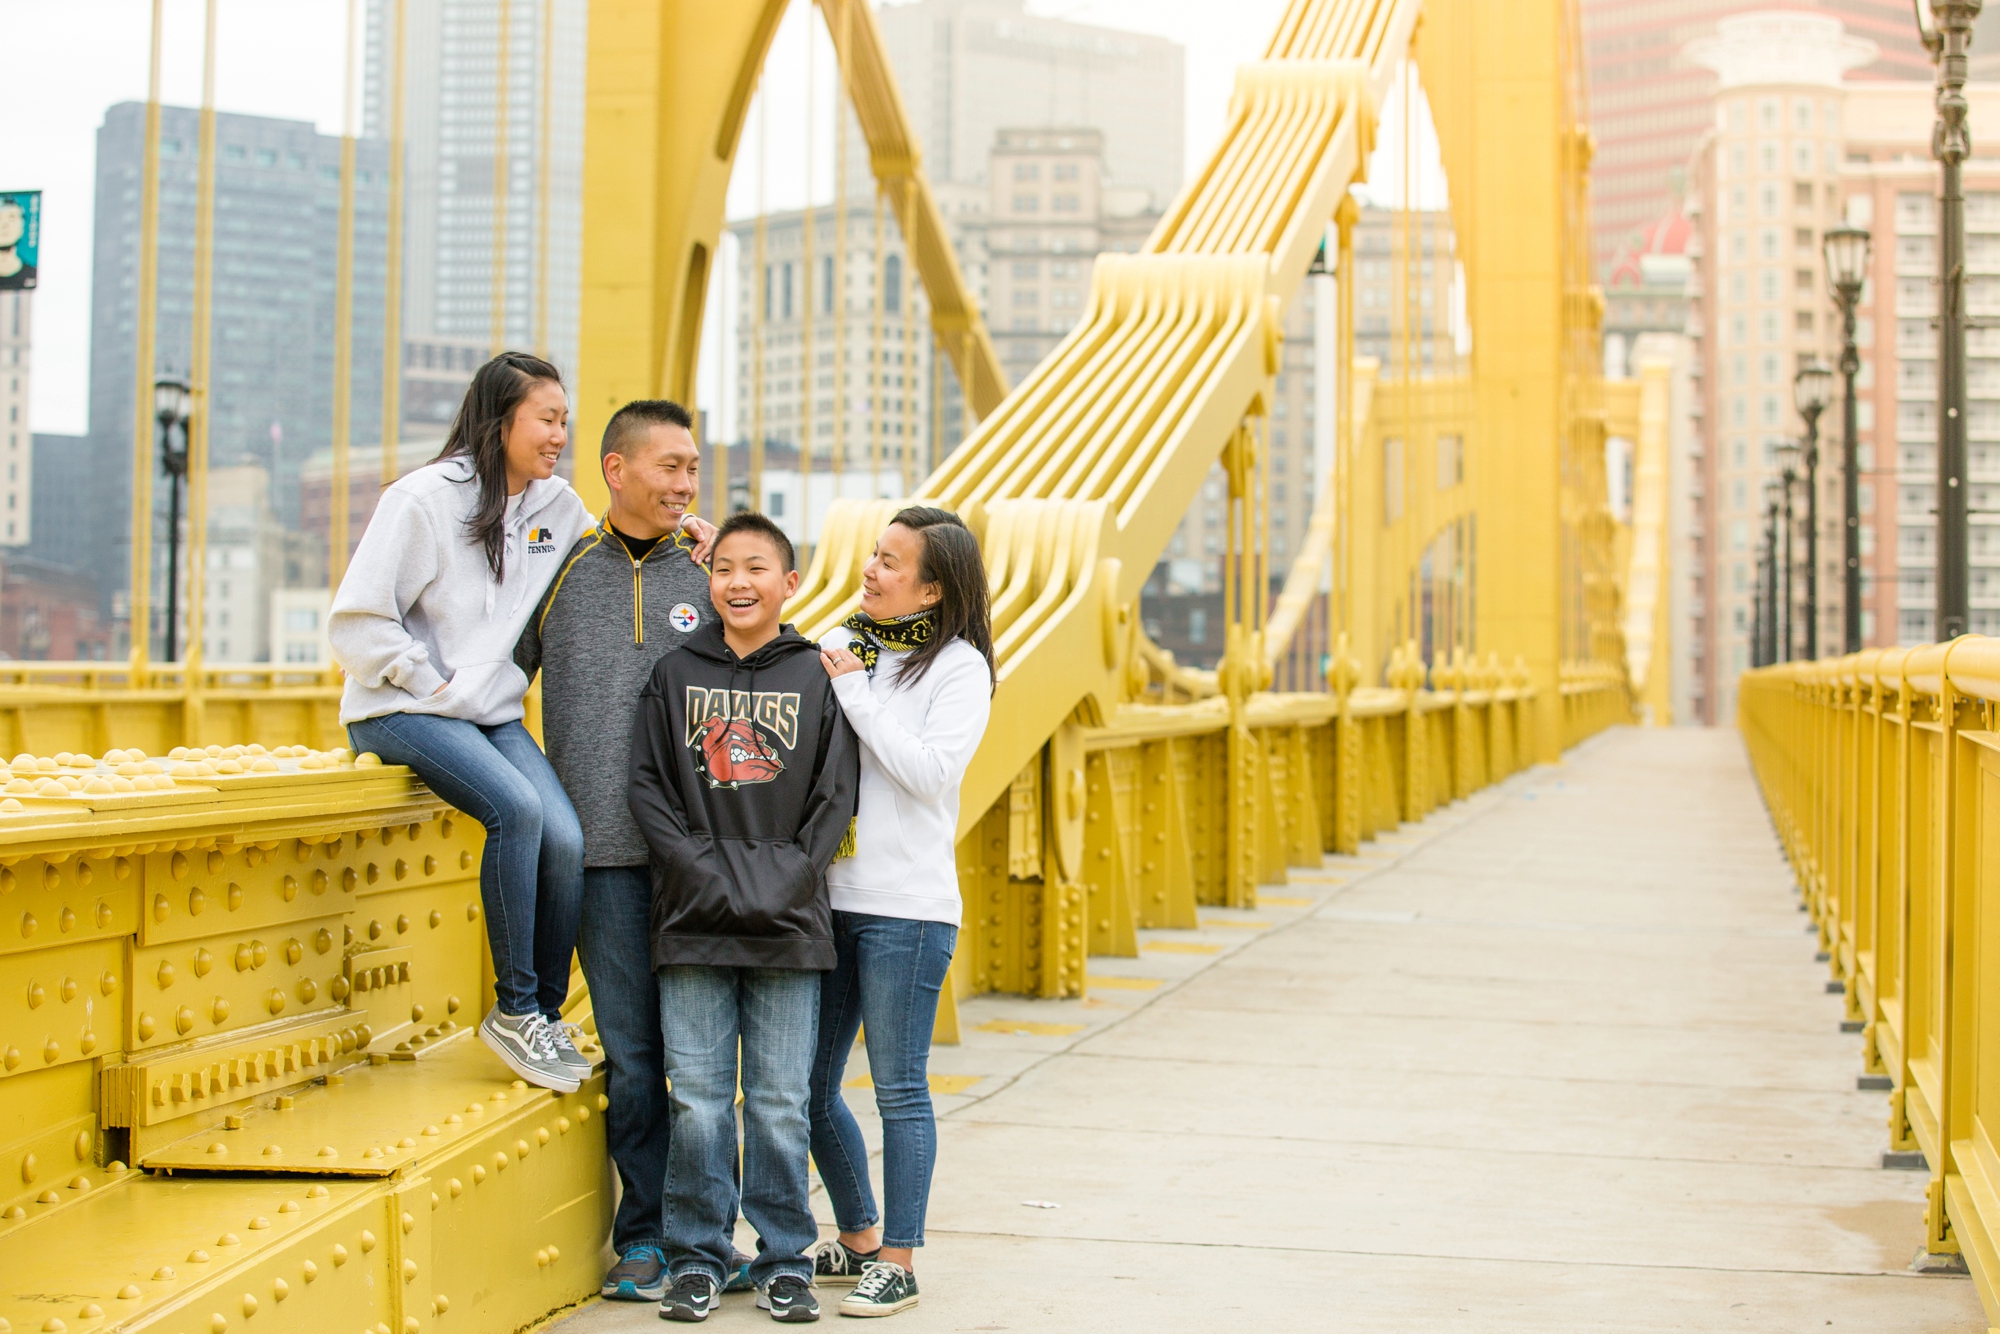 best places to take pictures in pittsburgh, cool places to take pictures in pittsburgh, north shore pittsburgh, pittsburgh family photographer, north shore pictures